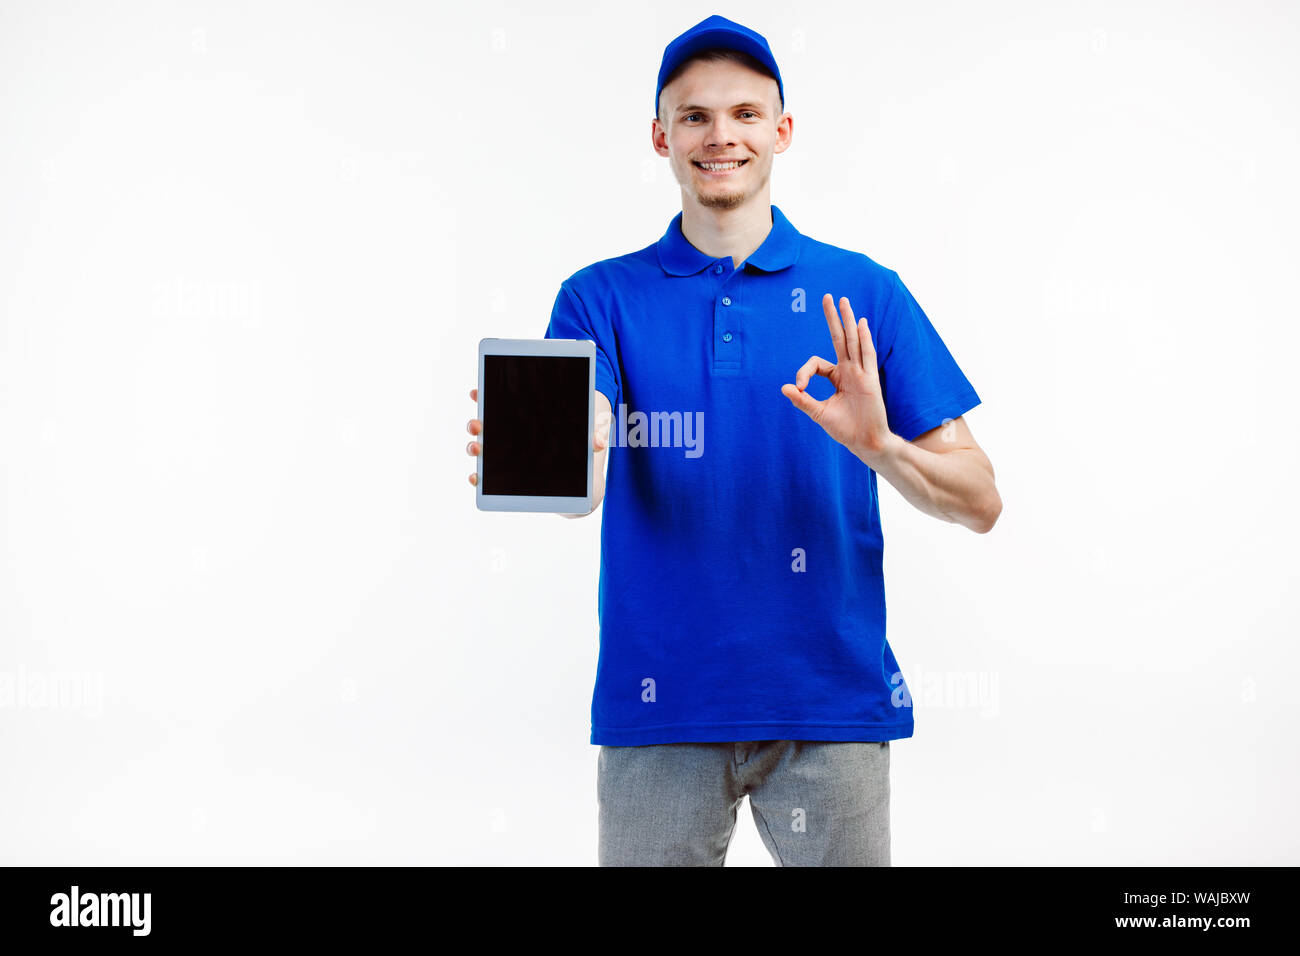 Delivery guy turns tablet screen towards the camera, smiles and does OK sign with his other hand. Stock Photo